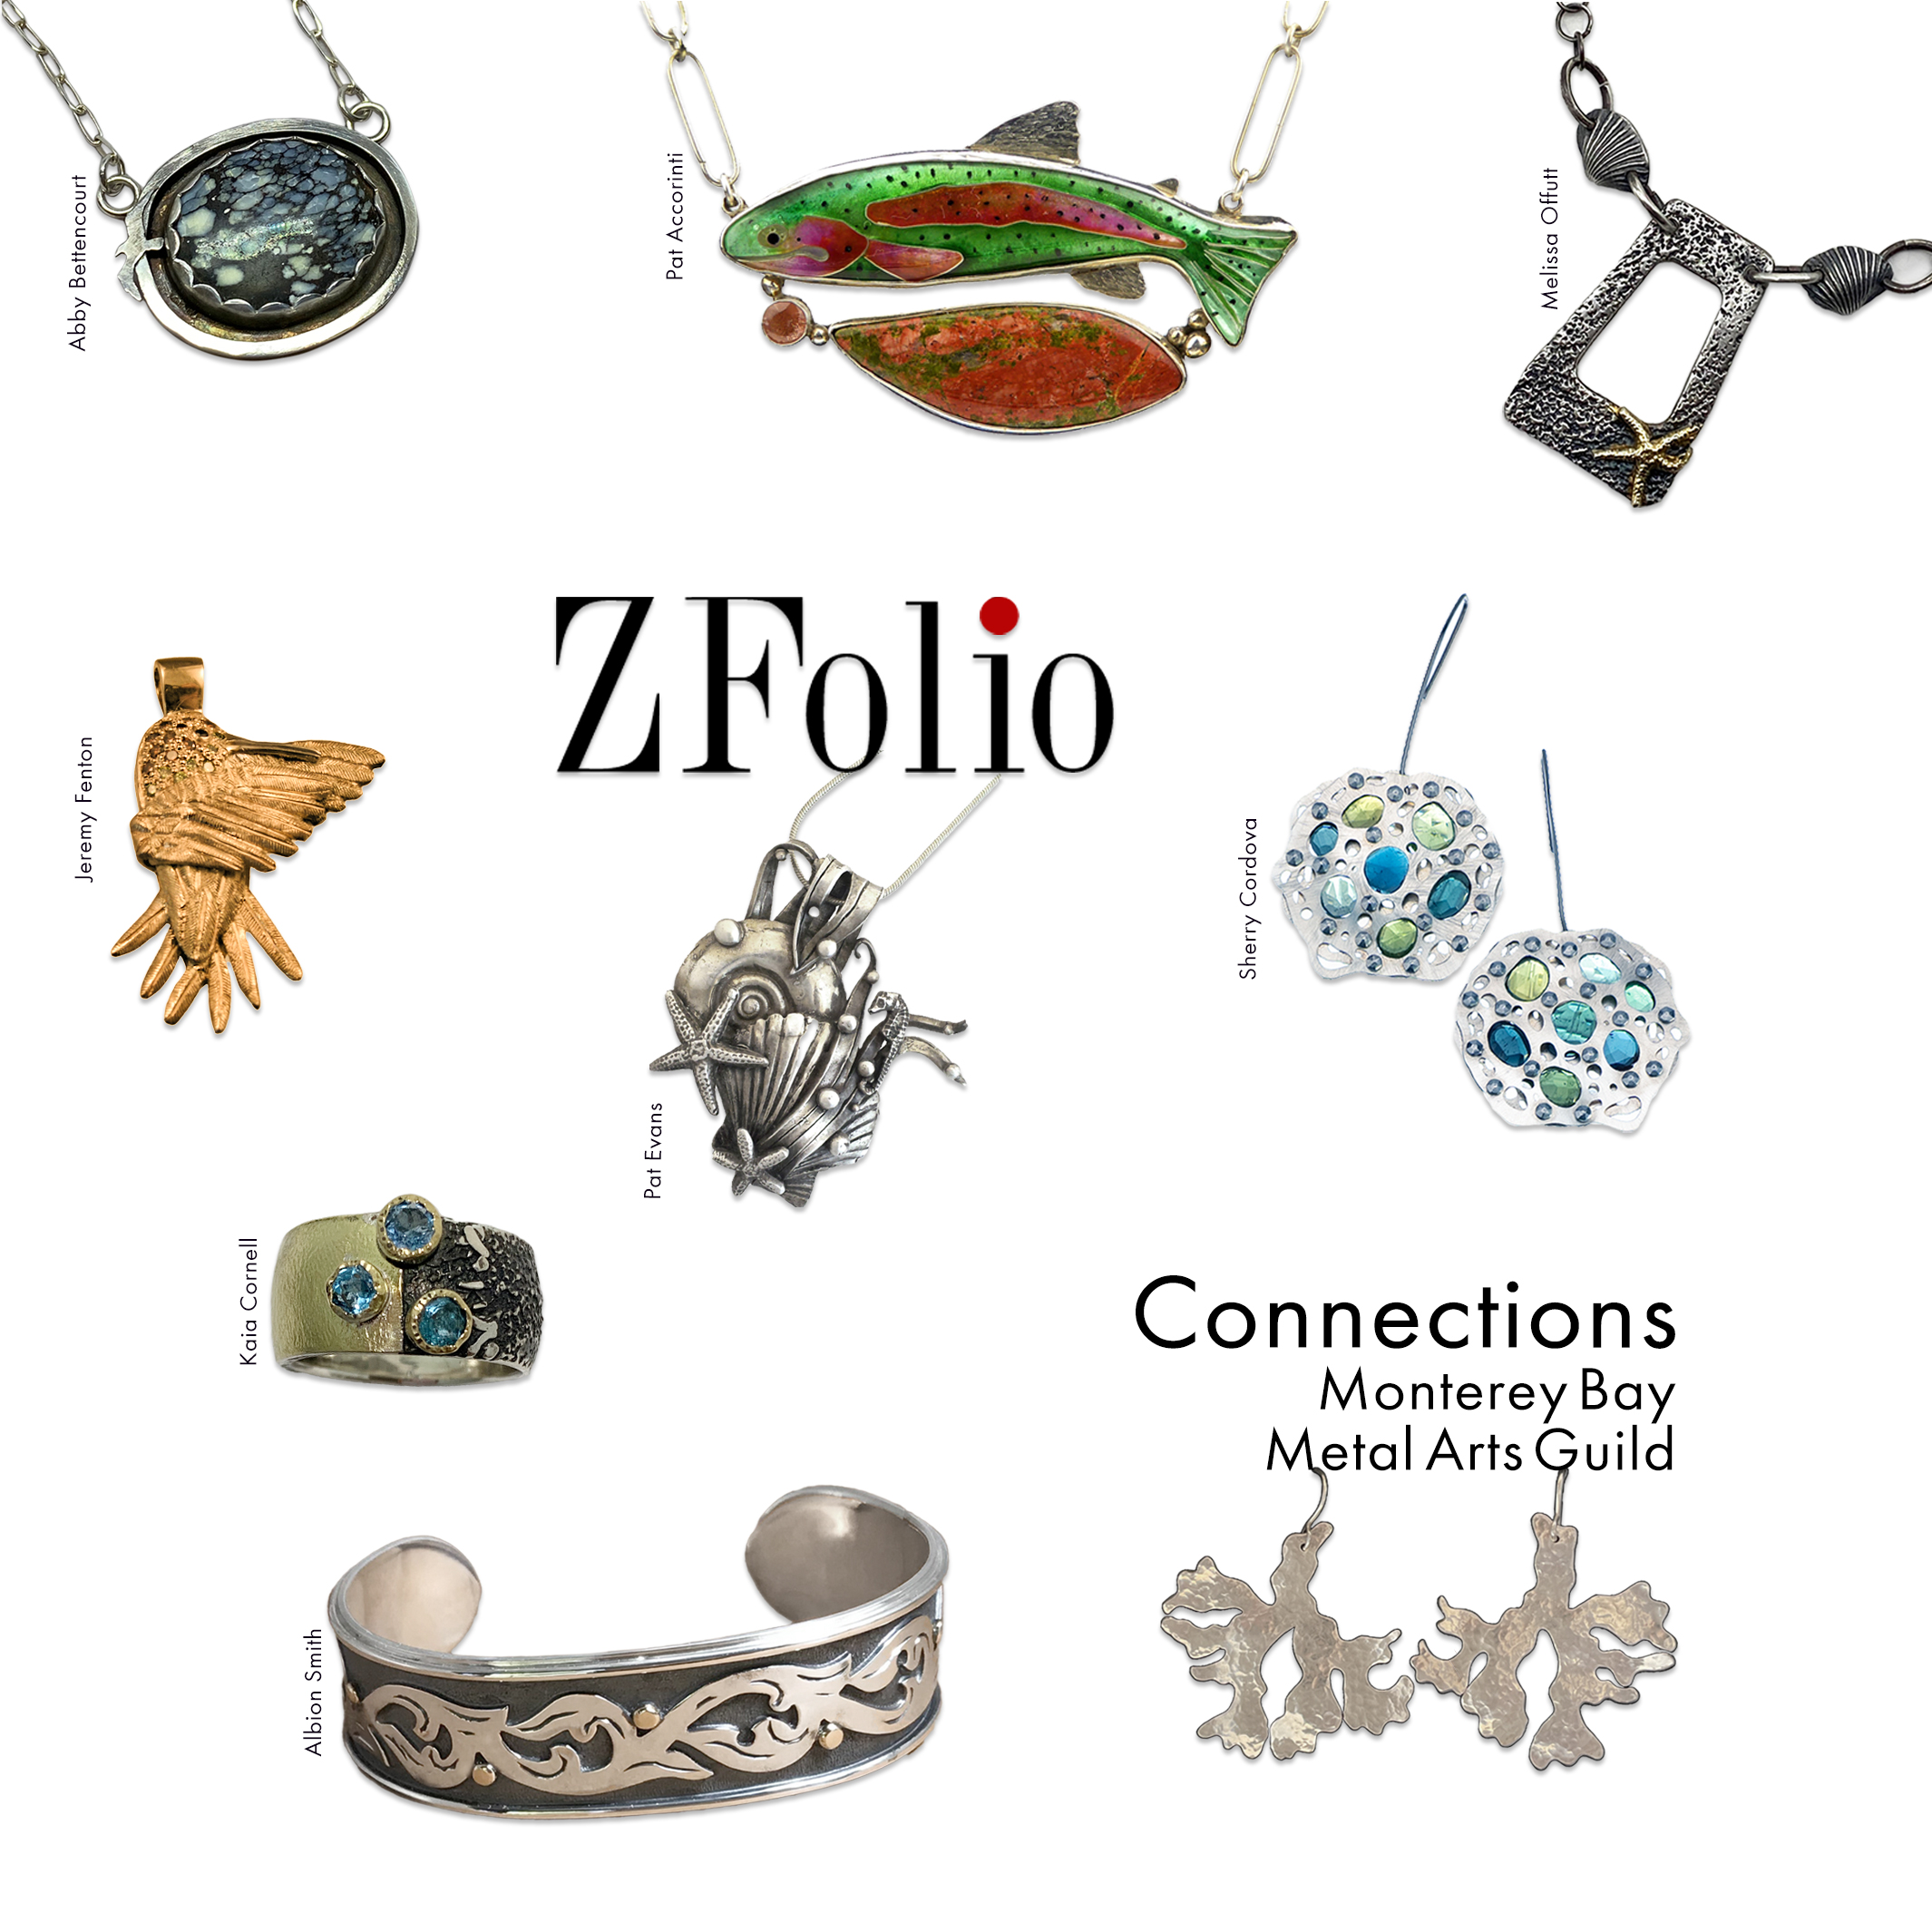 ZFolio Connections Monterey Bay Metal Arts Guild ad contains 4 necklaces, 1 pendant, 1 ring, 1 bracelet, and 2 pairs of earrings made by artist members of MBMAG